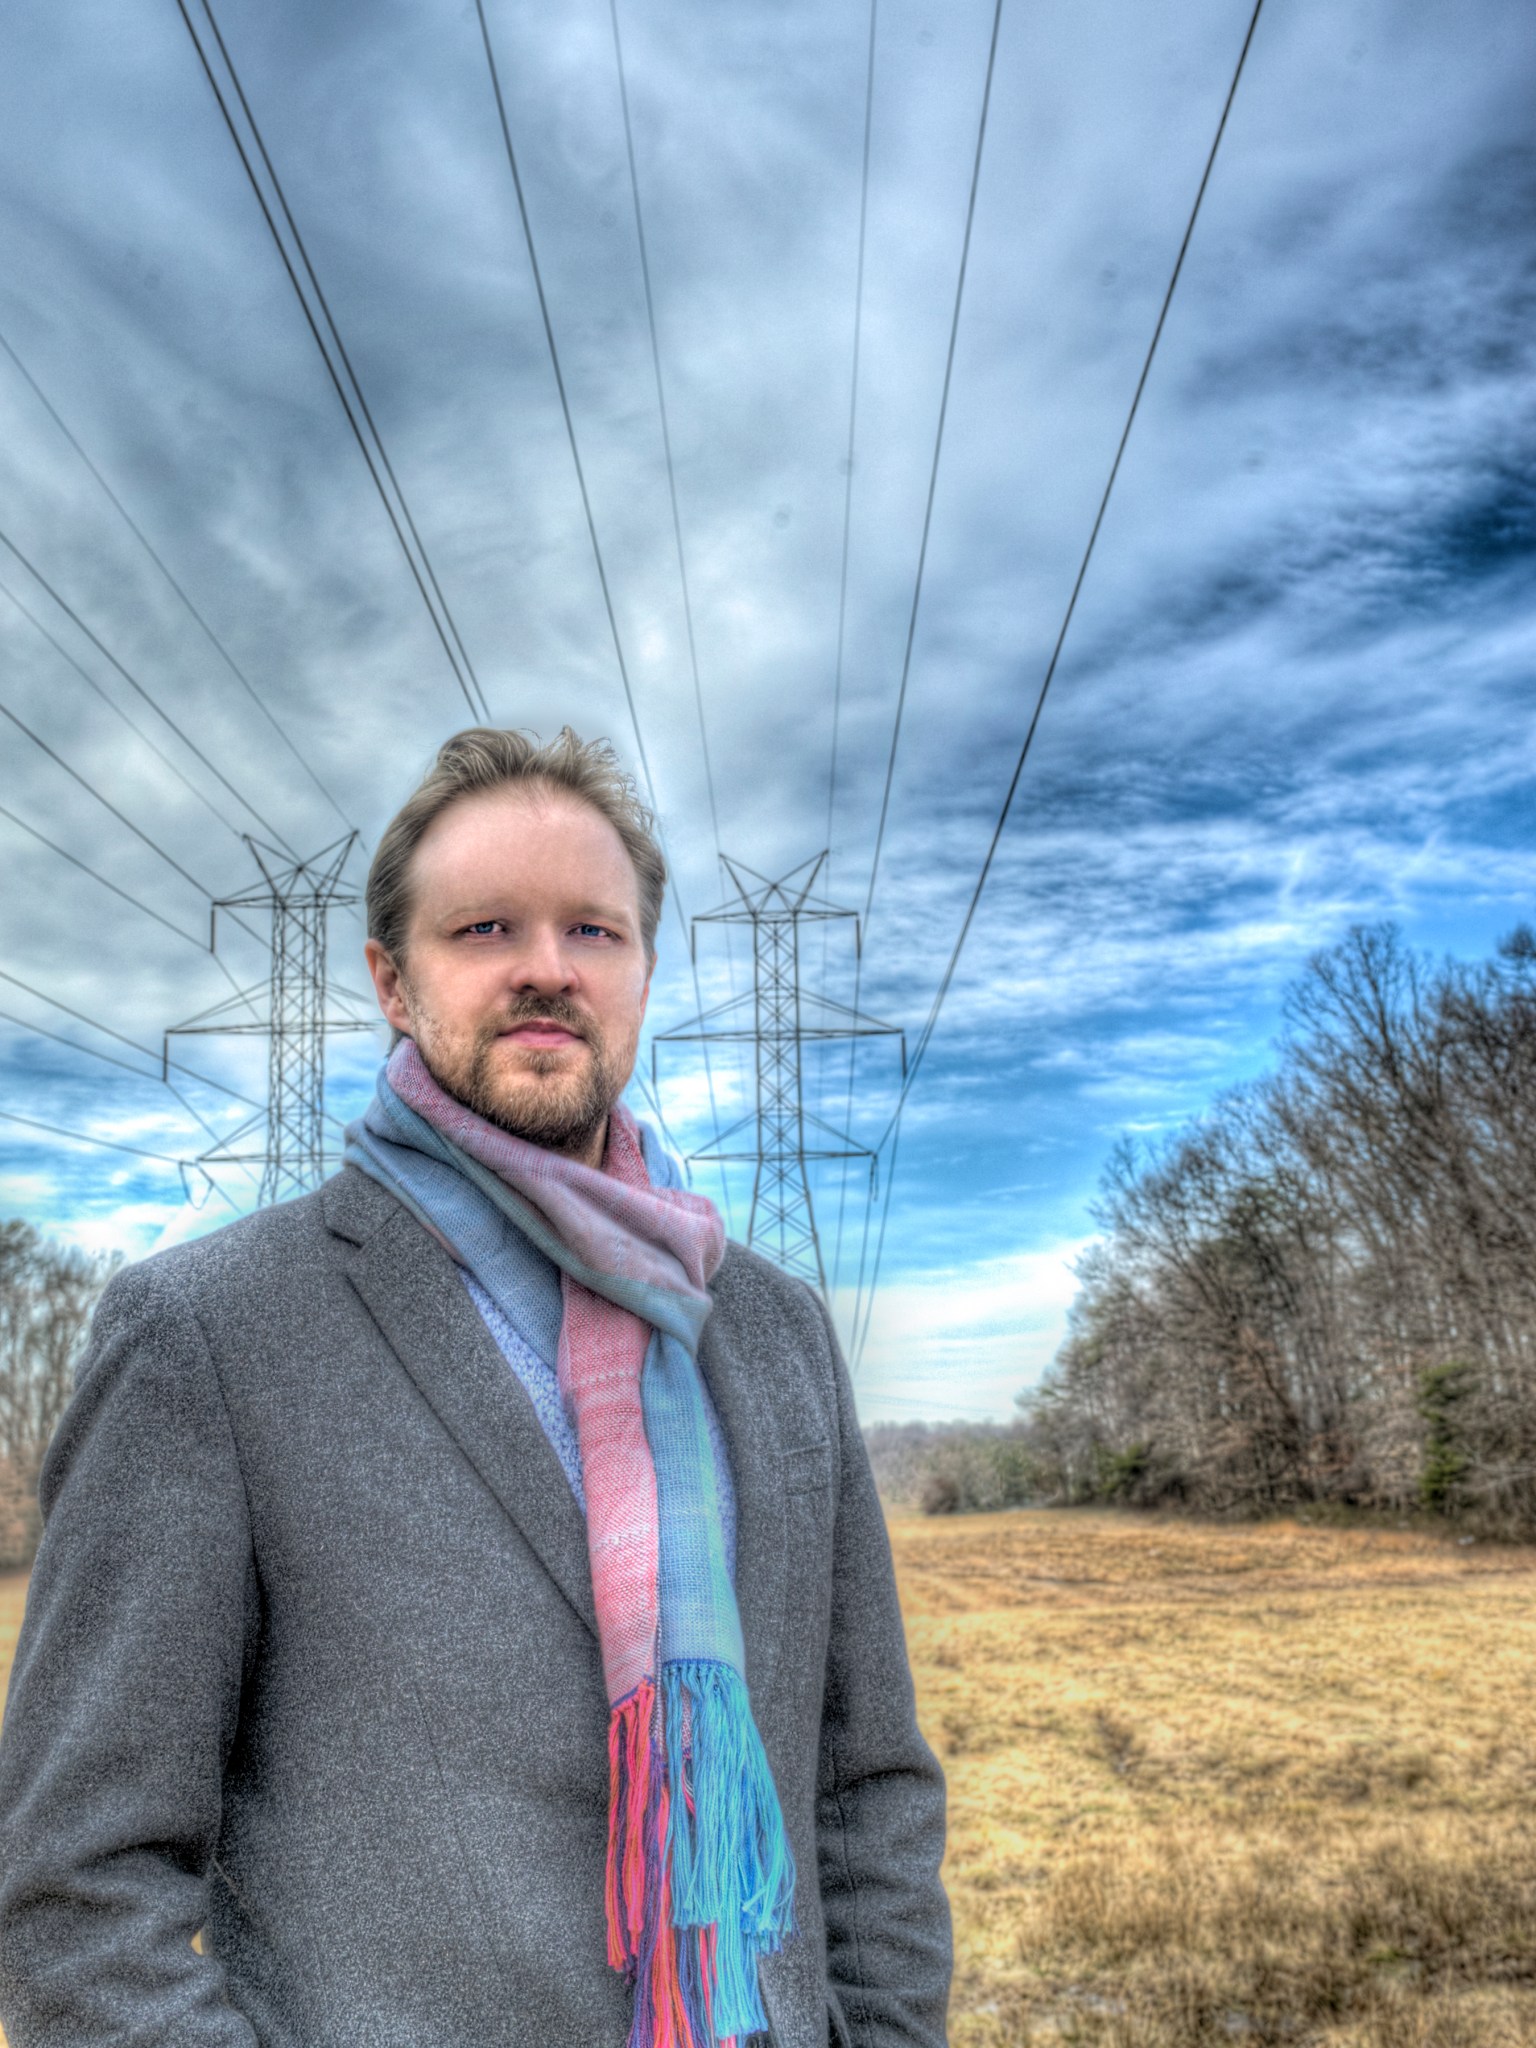 A man stands underneath power lines. The man has brown hair and brown facial hair. He is wearing a blue and pink scarf and a gray coat. 